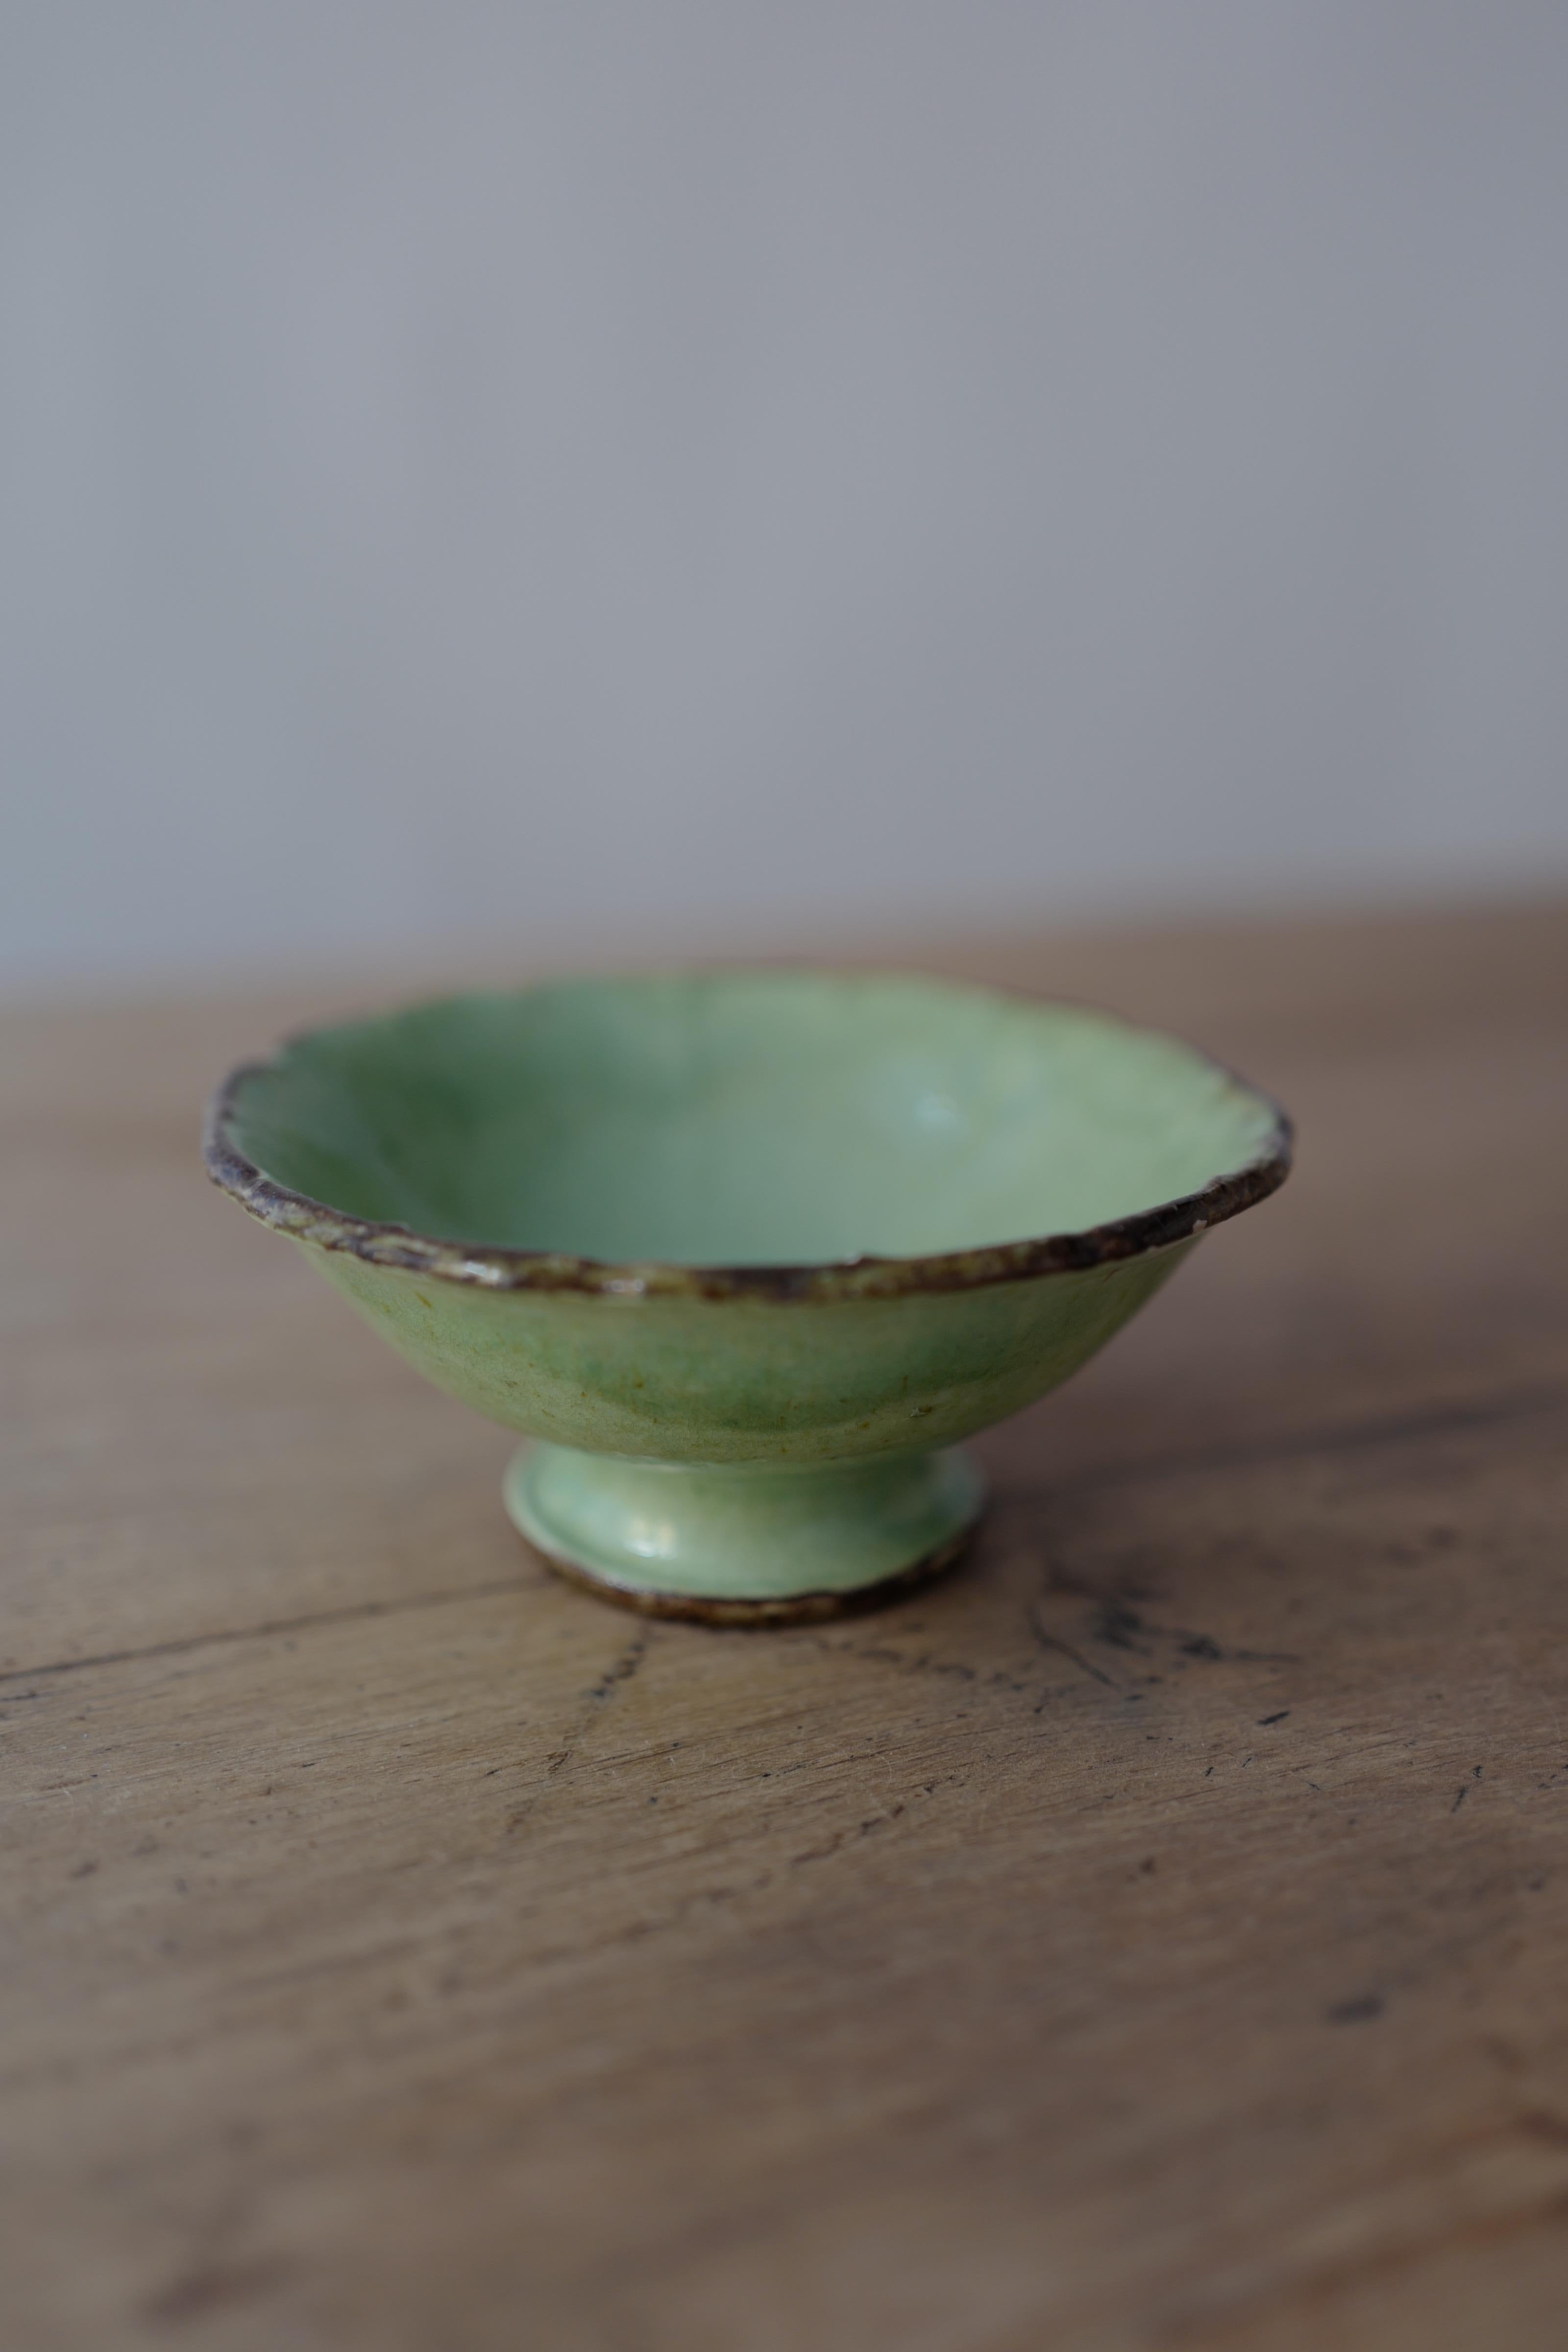 Dieulefit Poteries de Haute Provence green glazed bowl with scalloped edge trimmed in brown from village Dieulefit circa 1950's. 